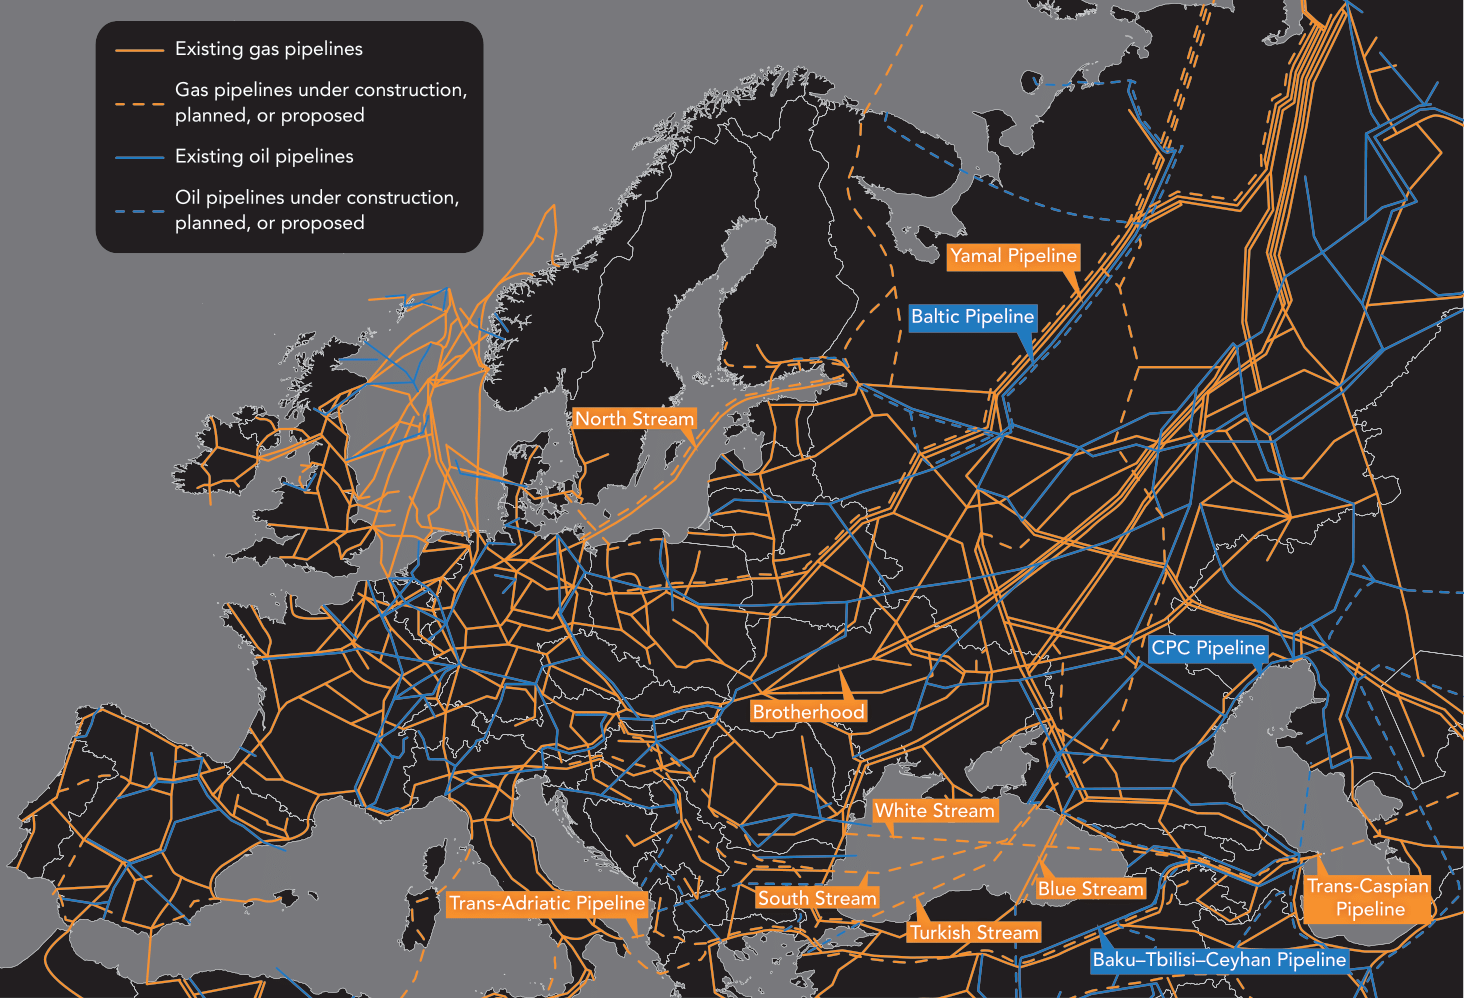 Europe and Russia: Connectivity and Leverage